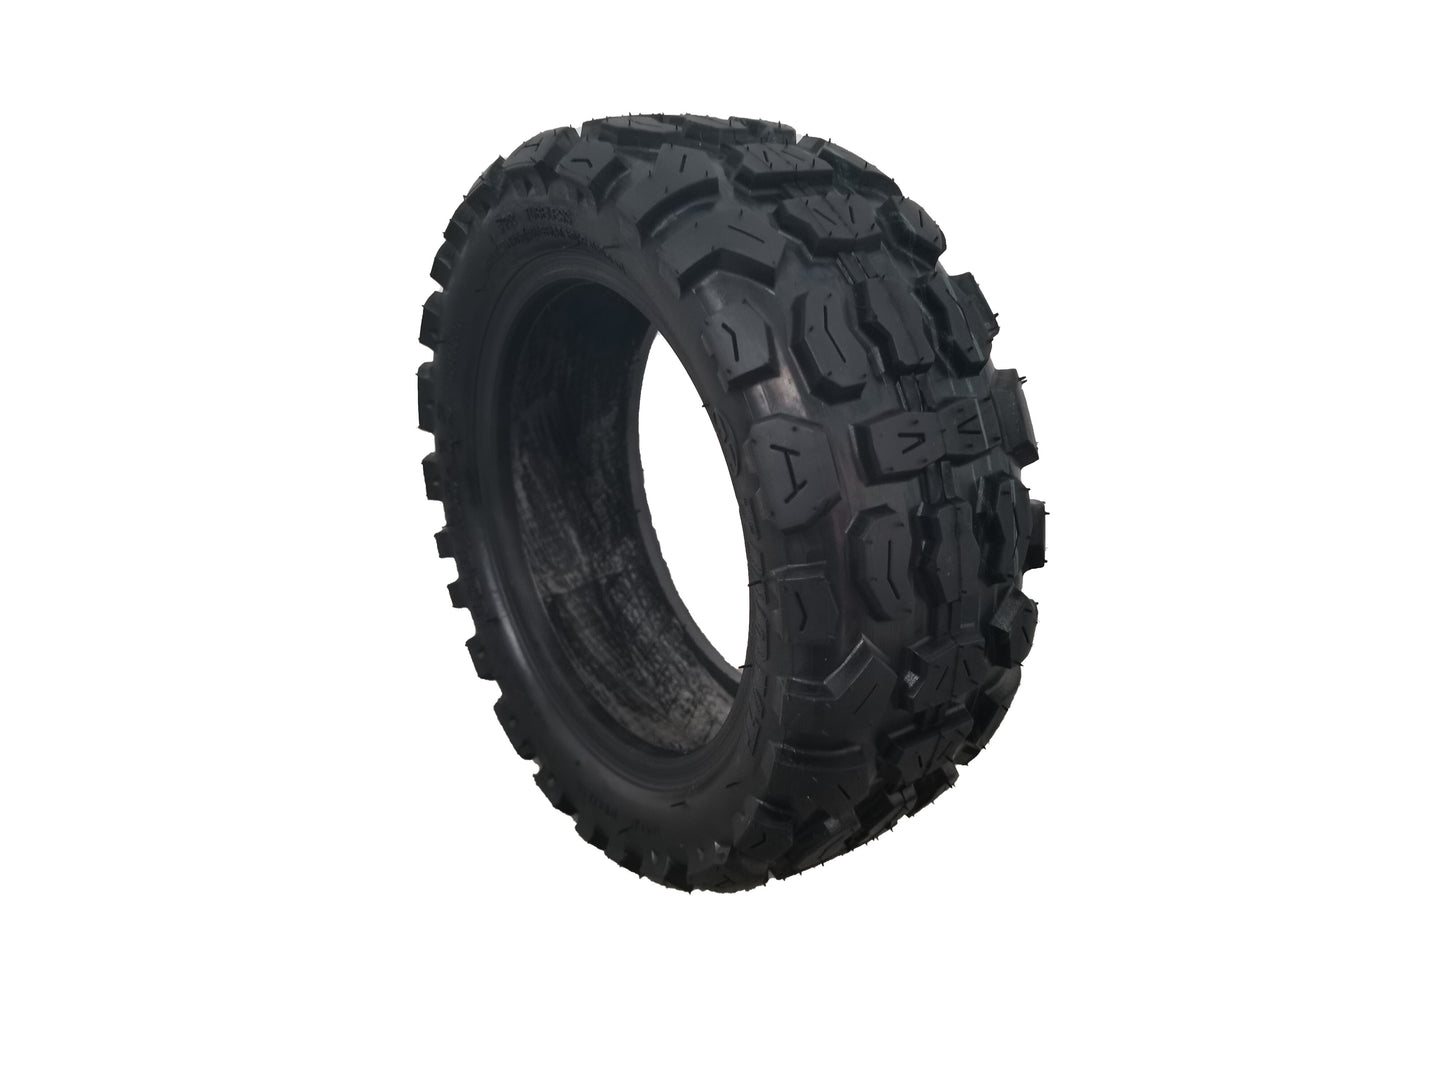 Generic Polymer Material Rubber Black 10 Inch/ 11 Inch Off Road/ Street Tire for Boyueda Electric Scooter Accessory Parts